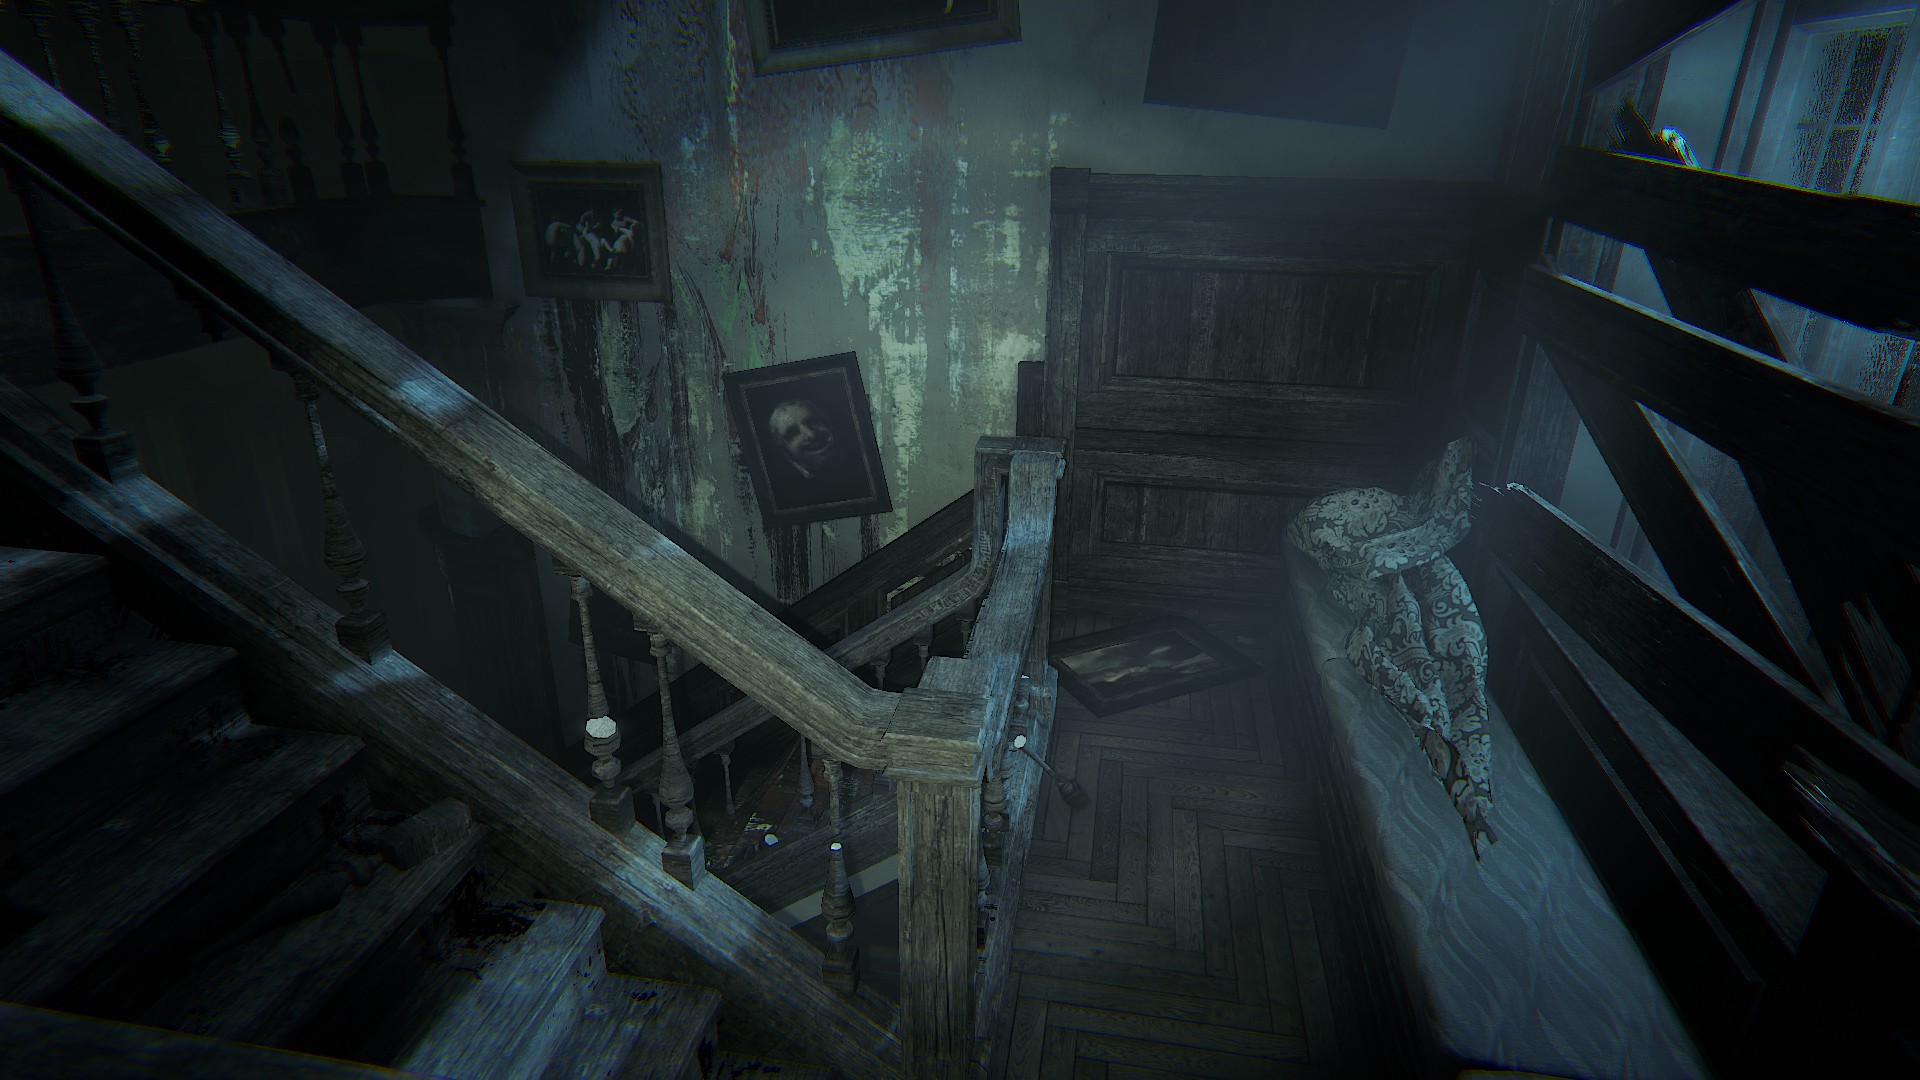 Layers of Fear Inheritance